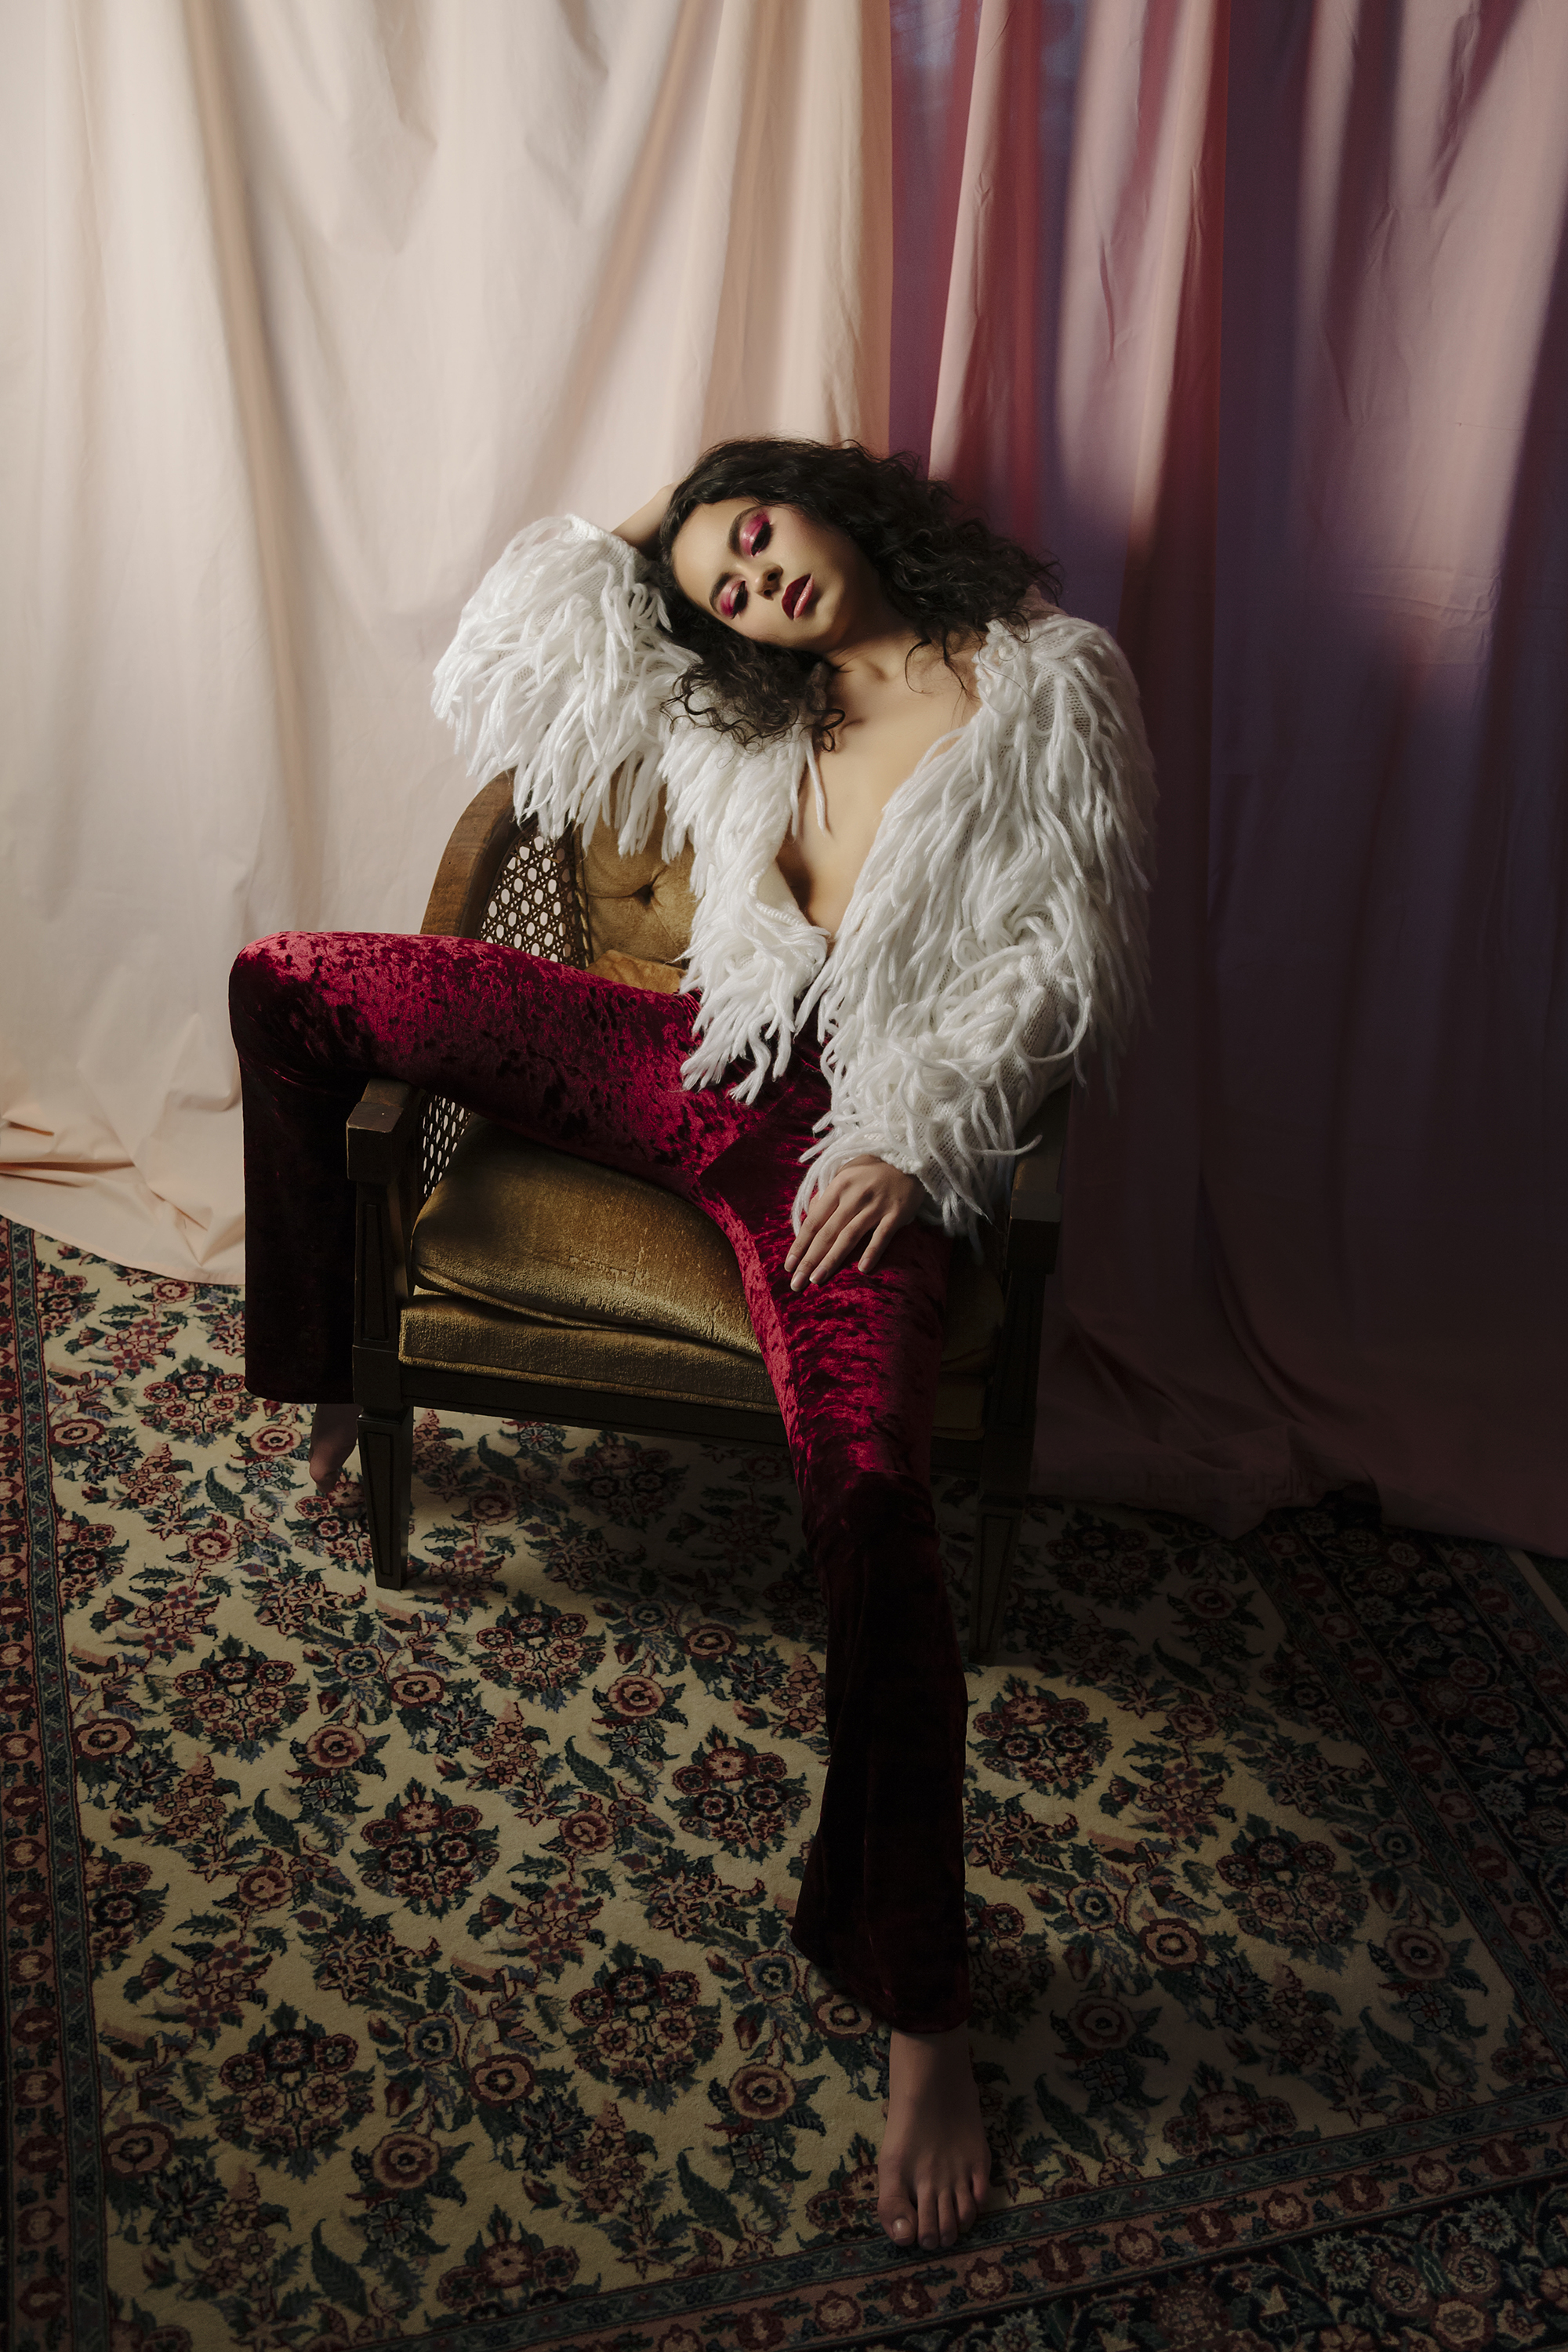 lPenelope's Dream - Editorial by Rose Catherine Hohl